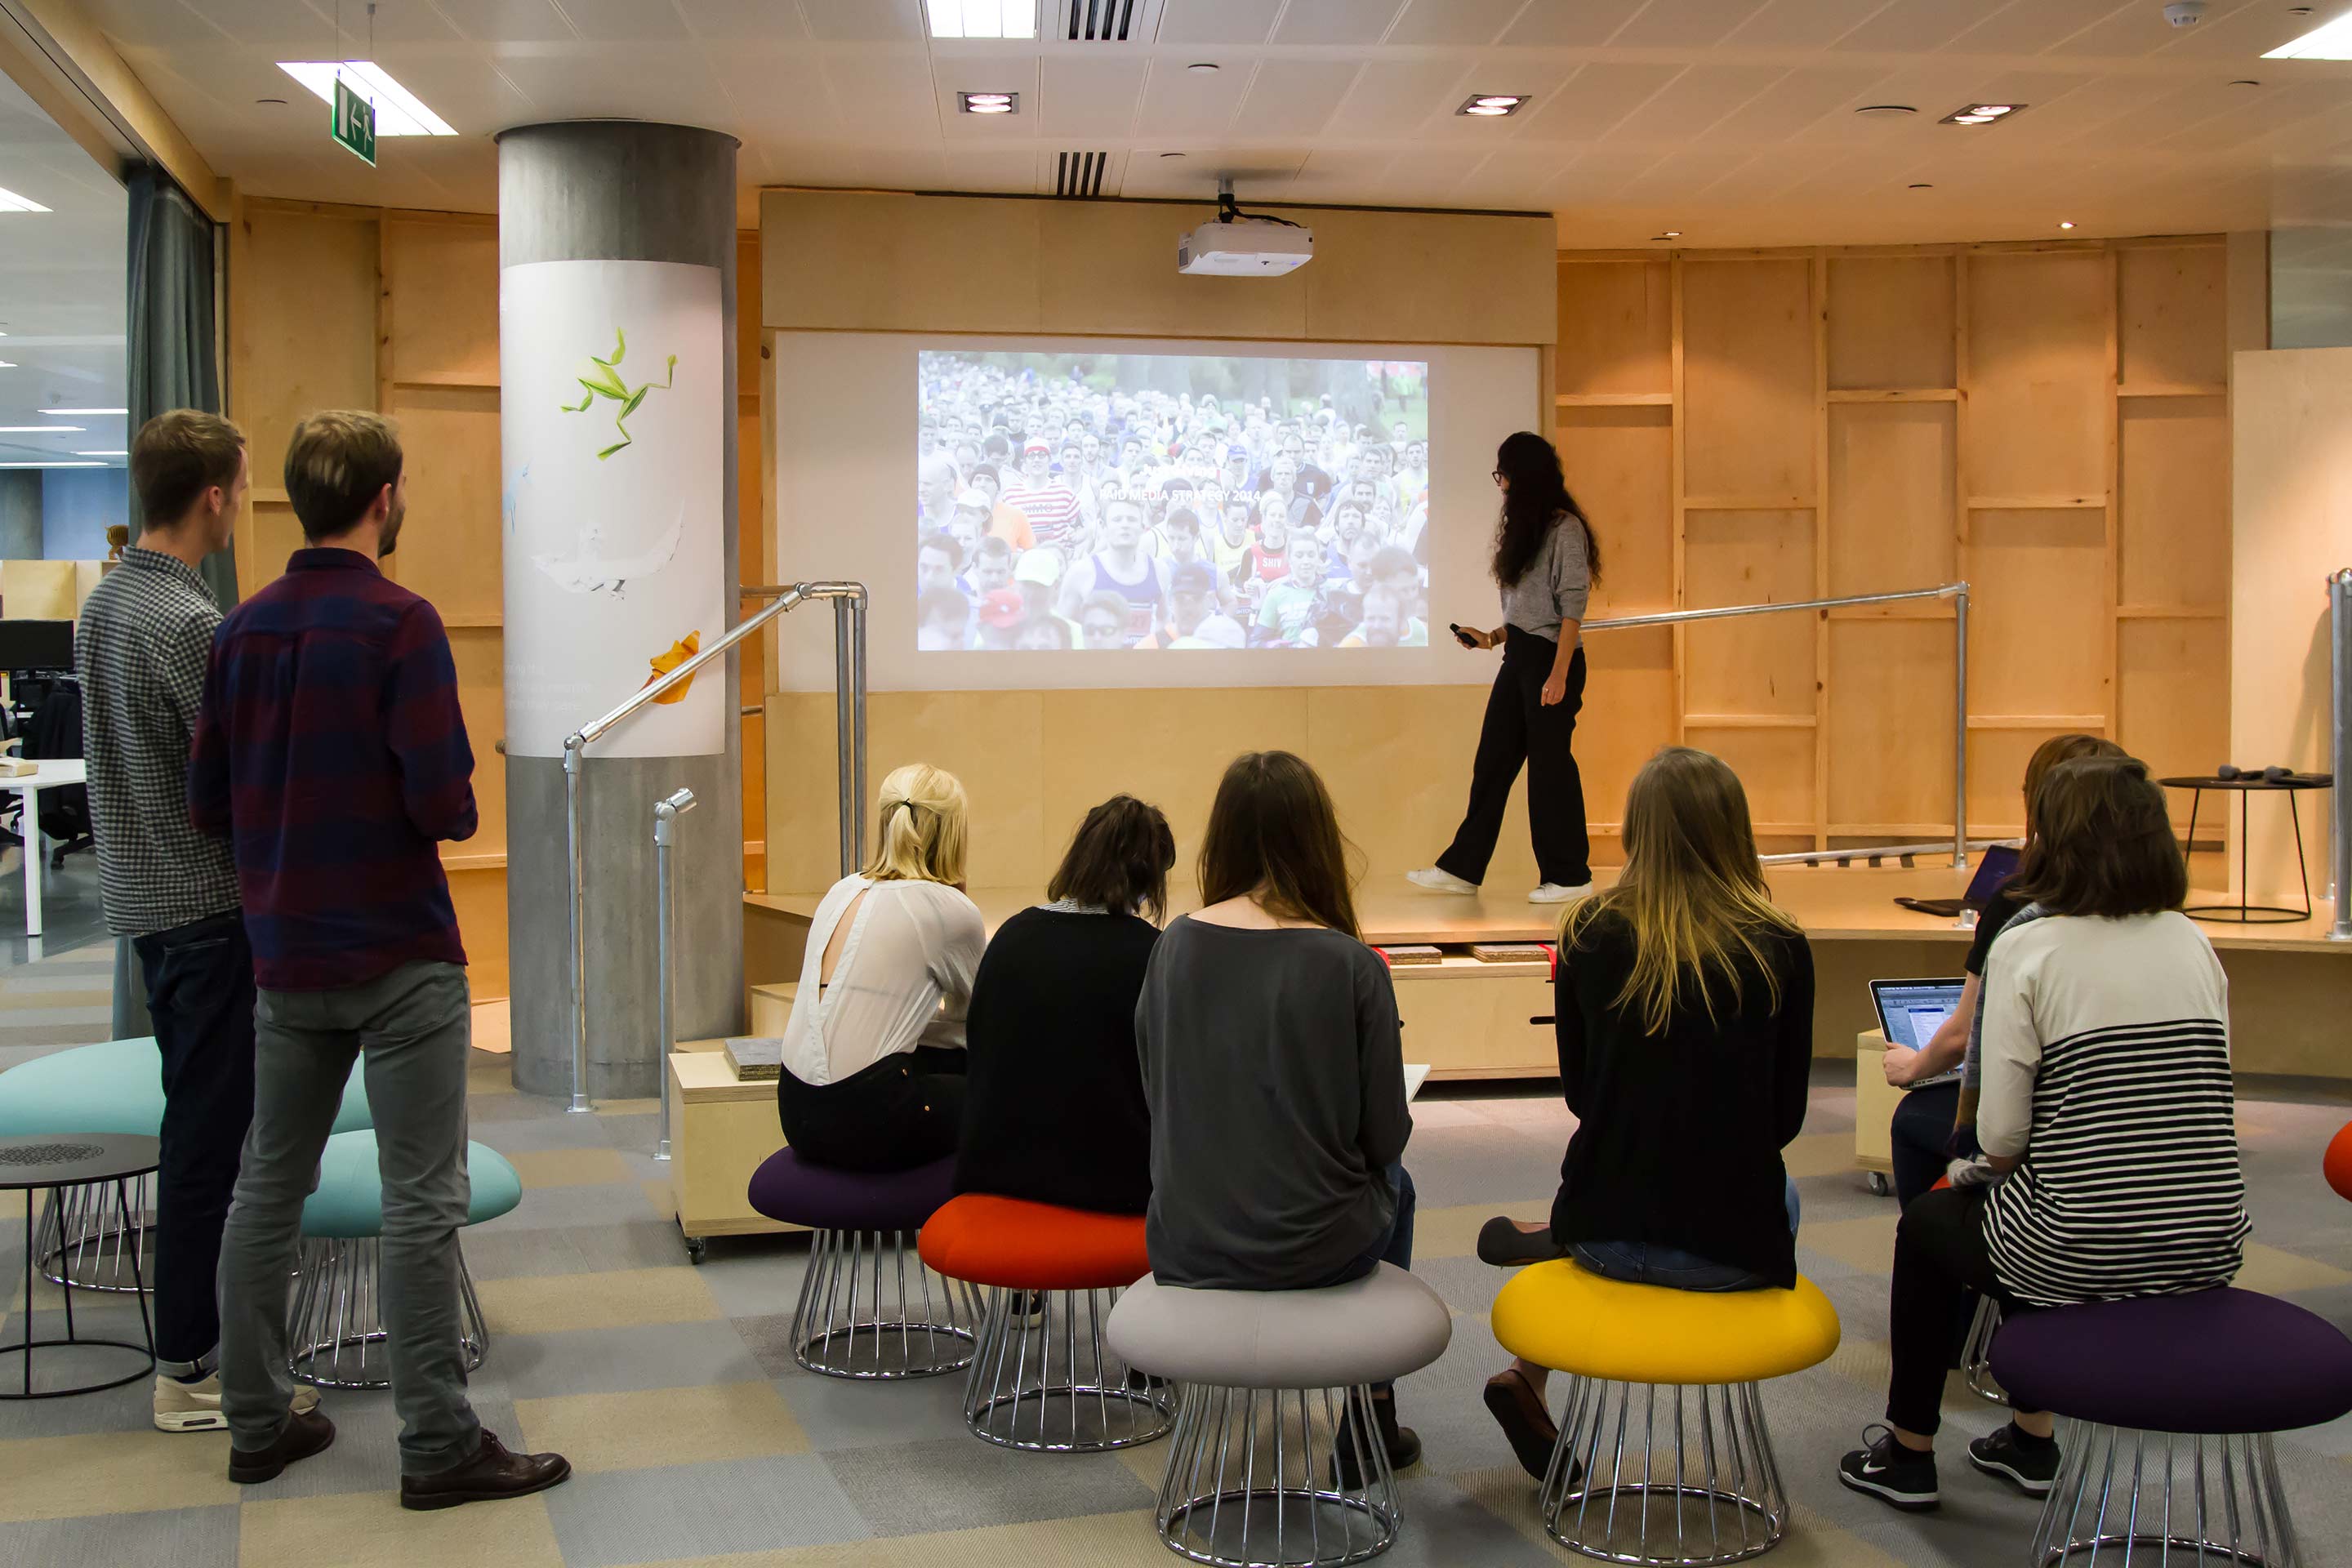 Making use of JustGiving's ampitheatre-style breakout area